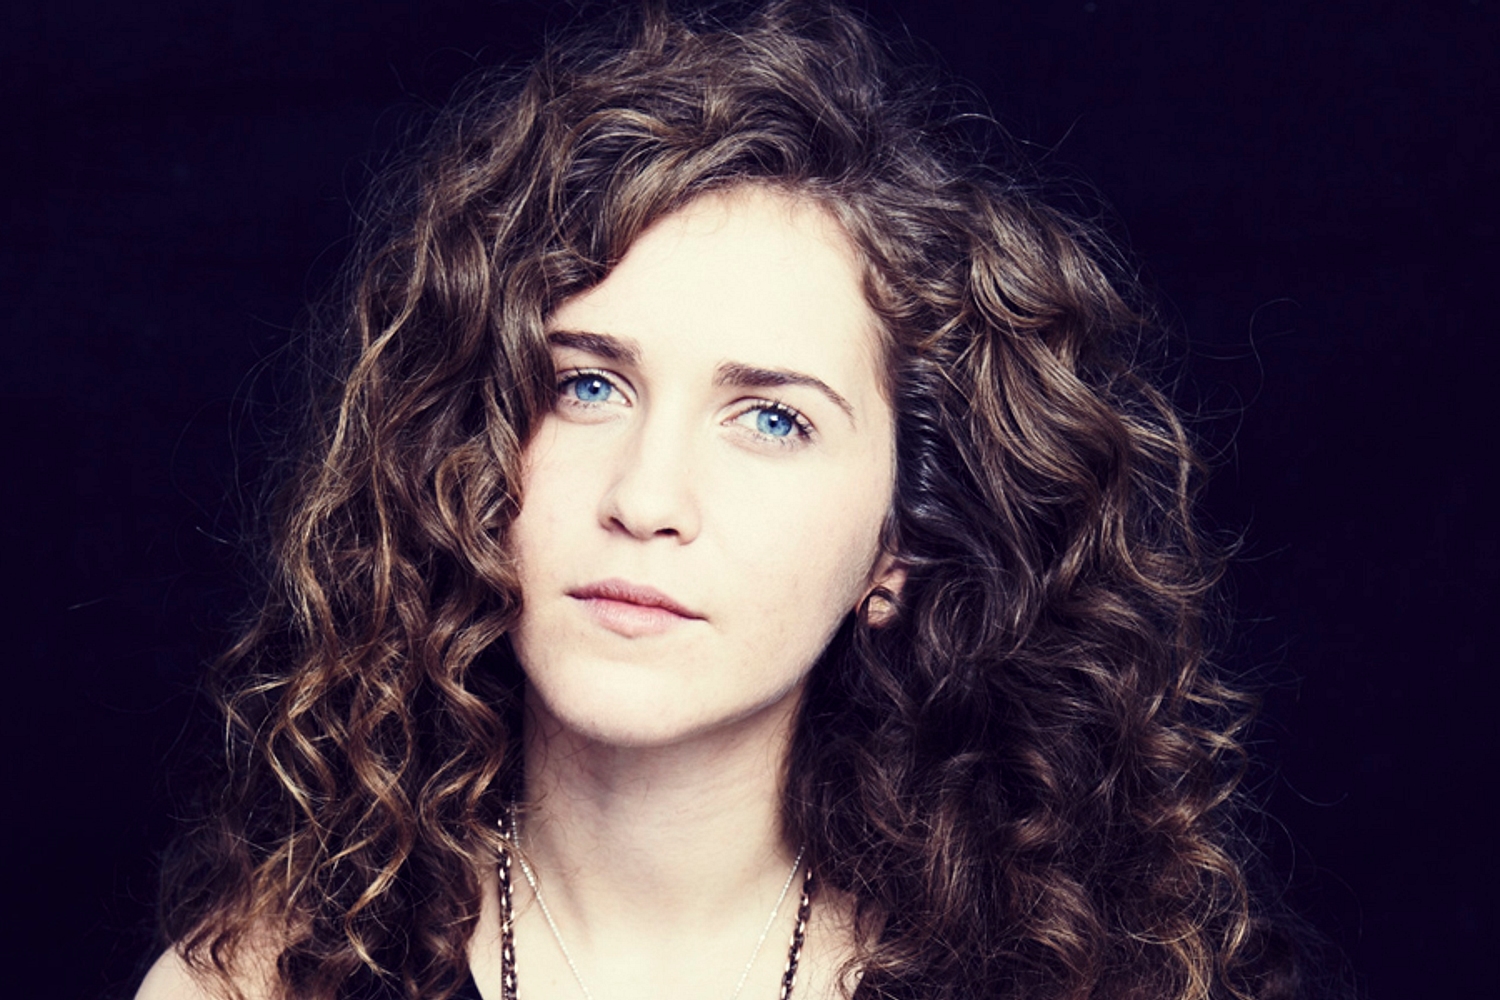 Rae Morris: “This is me, this is who I am”